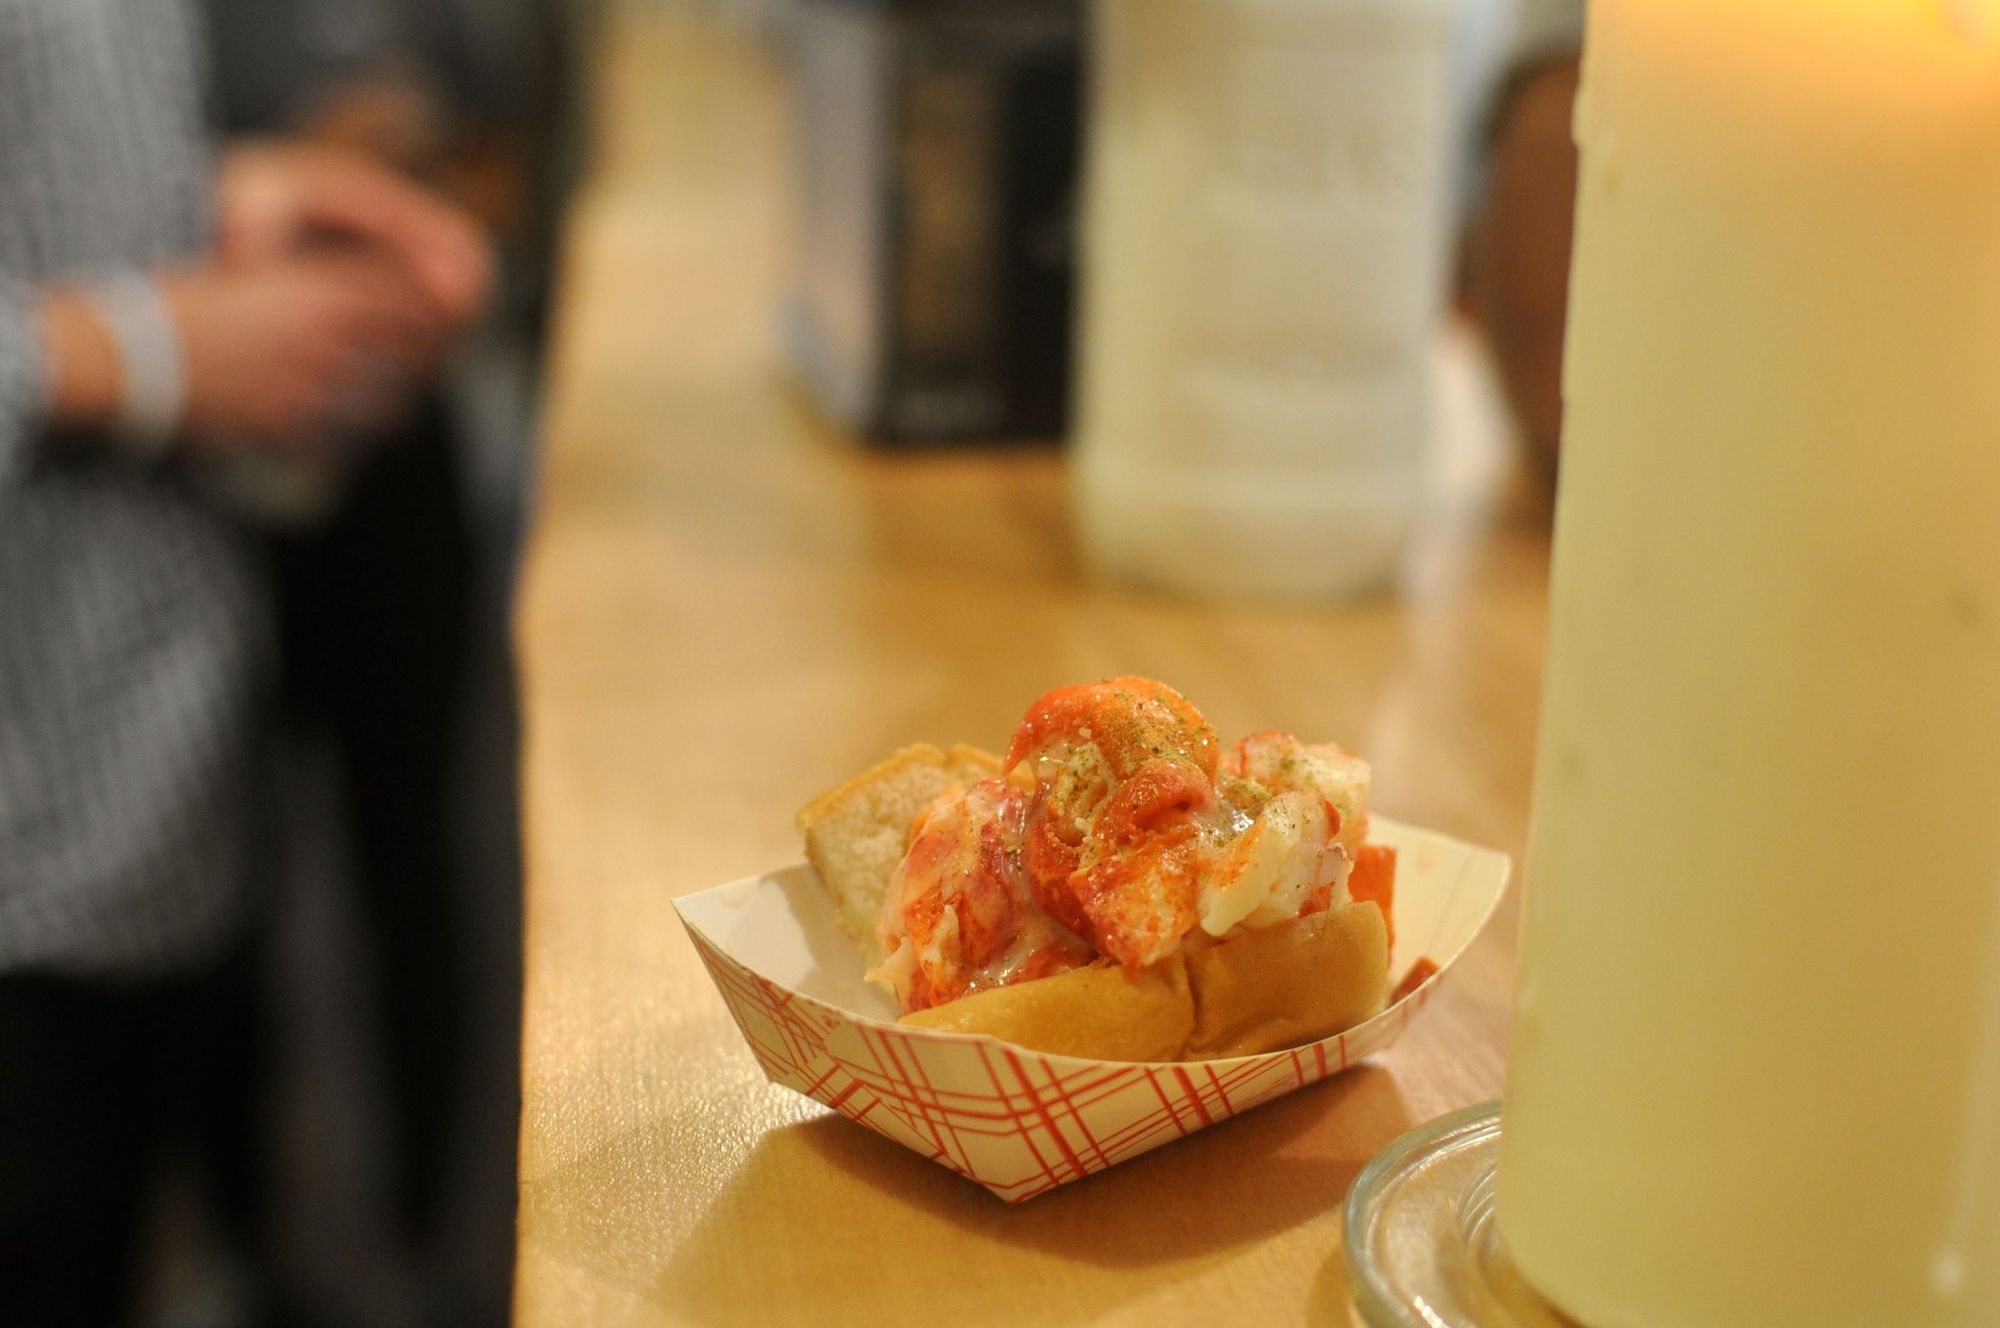 Luke’s Lobster Brings Rolls, Beers & A Relaxed Maine Attitude To 5th Avenue